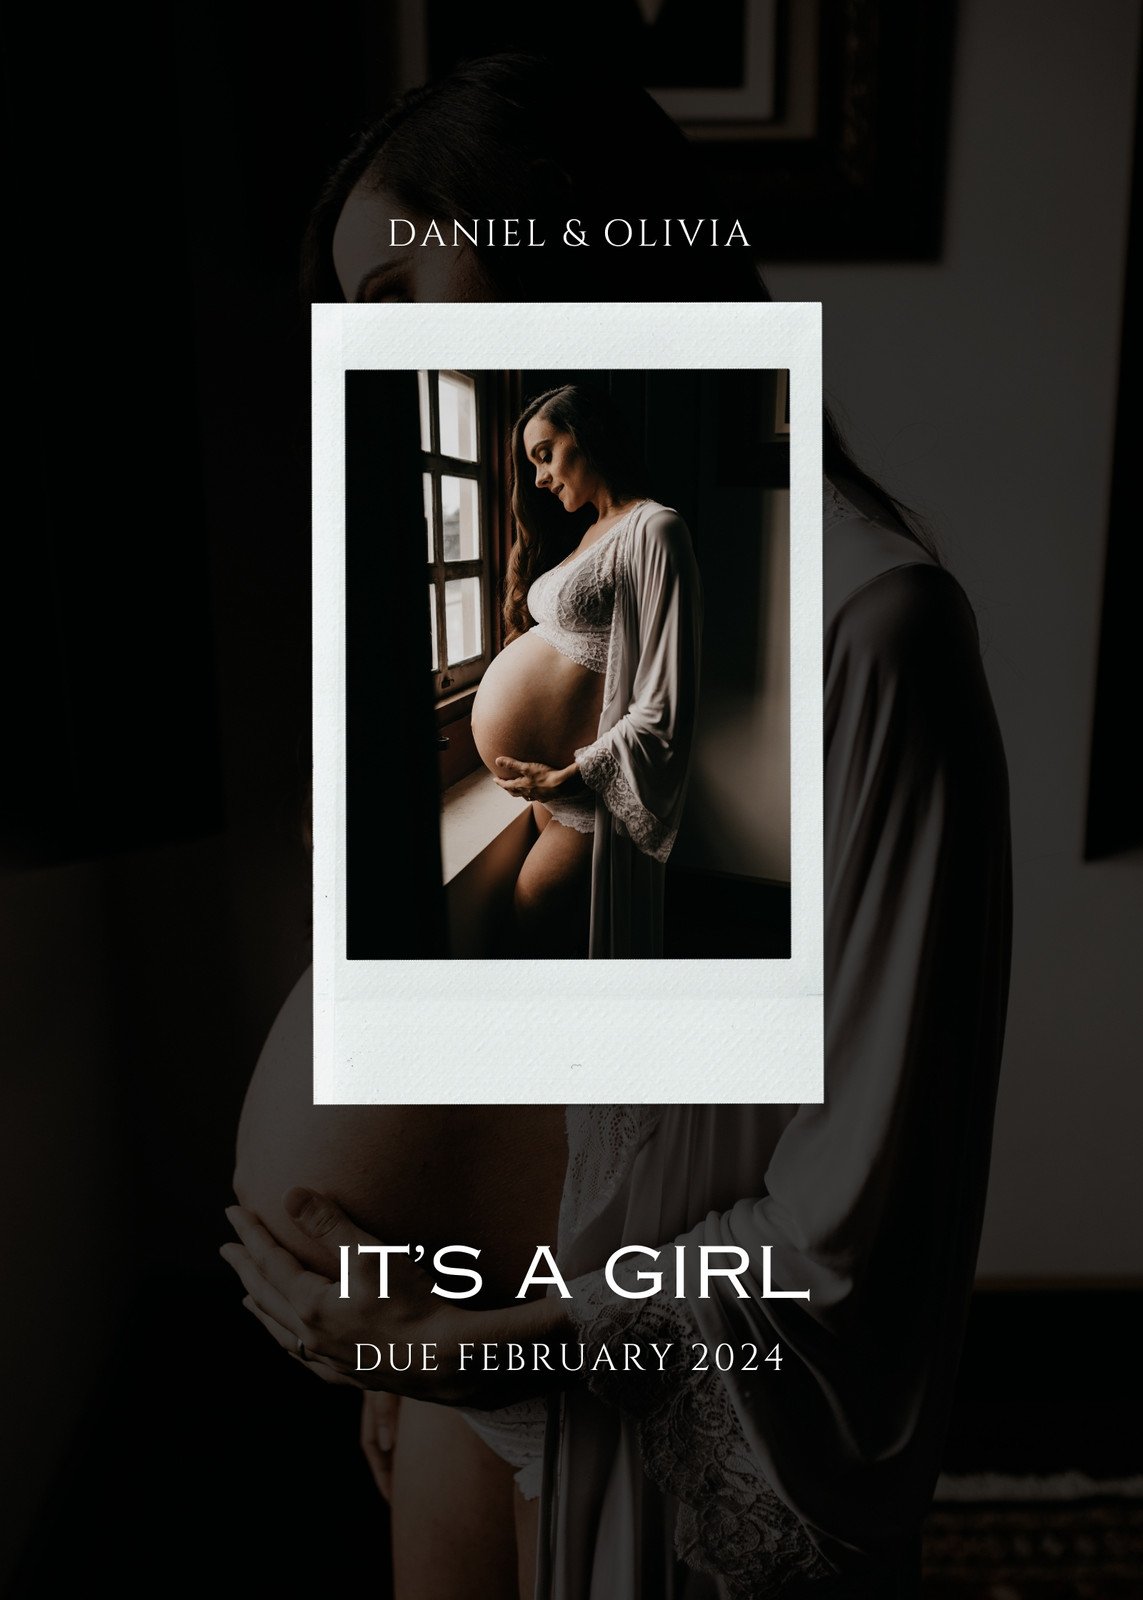 Pregnancy Announcement, Digital Baby Reveal, Editable DIY Template, Gender  Reveal Idea, for Instagram or Any Social Media or Send Text. -  Canada